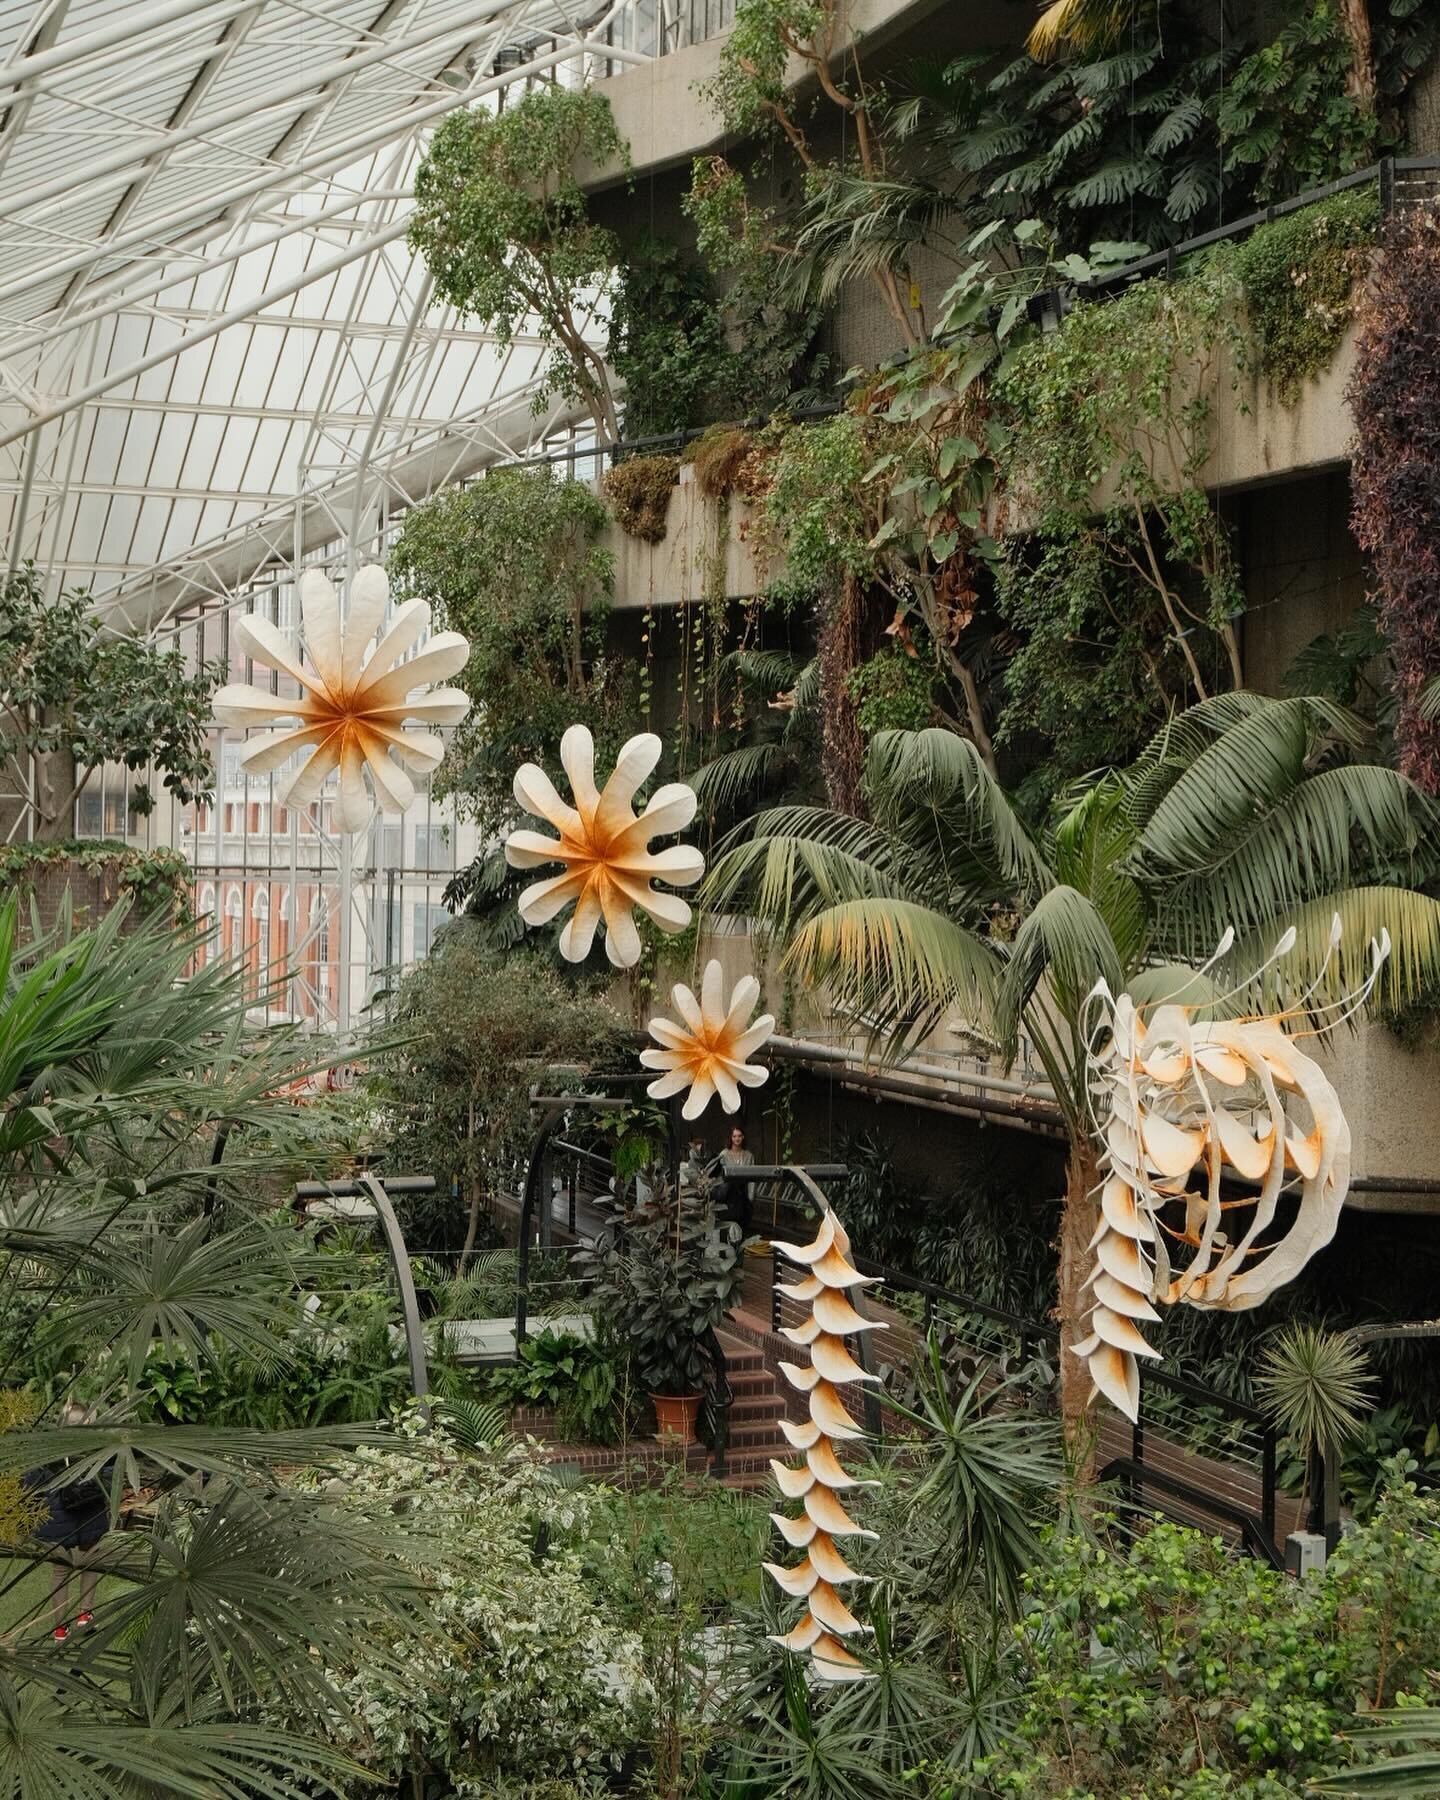 The amazing Ranjani Shettar sculptures at the Barbican Conservatory. I&rsquo;ve been trying to see this for months and finally managed to score the free tickets this weekend! Do see it if you can, it was such a delight. Unraveled is on show in the ar